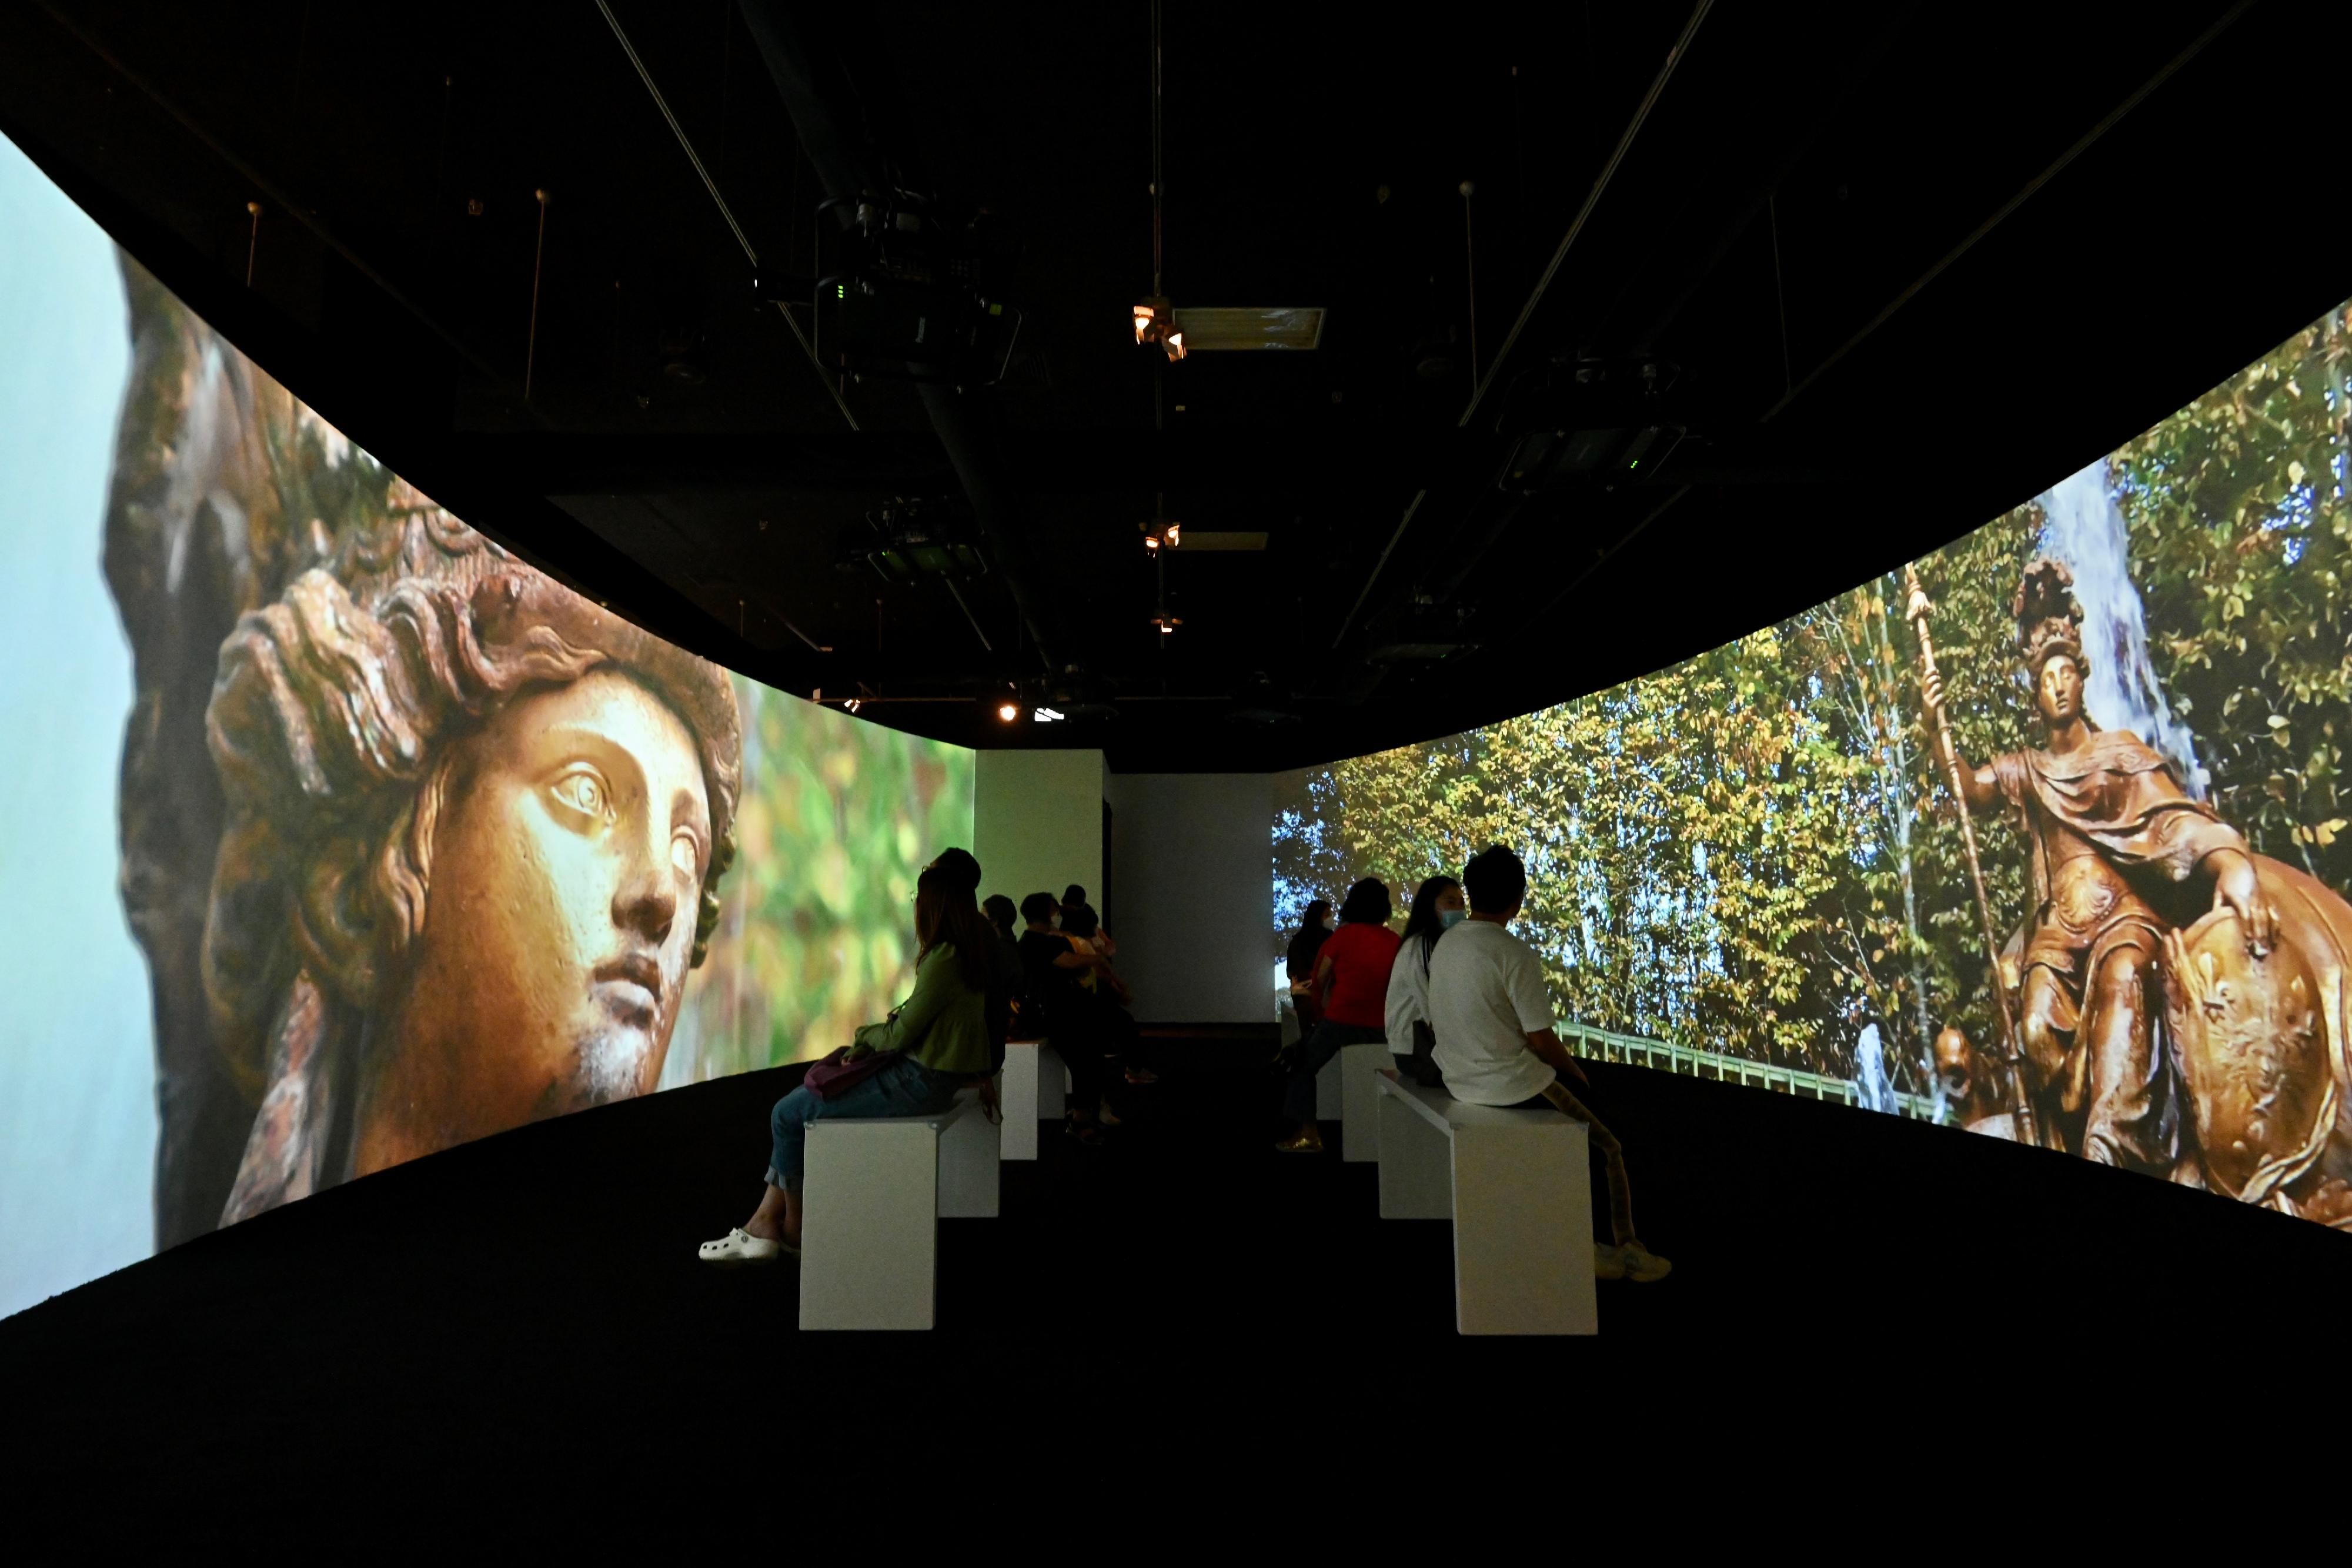 The opening ceremony for the exhibition "Virtually Versailles" was held today (April 19) at the Hong Kong Heritage Museum. Photo shows an immersive projection film "A Day in Versailles", which conveys the beauty of a day in the Palace of Versailles from dawn to dusk with panoramic views of the gardens, statues, fountains and firework displays.